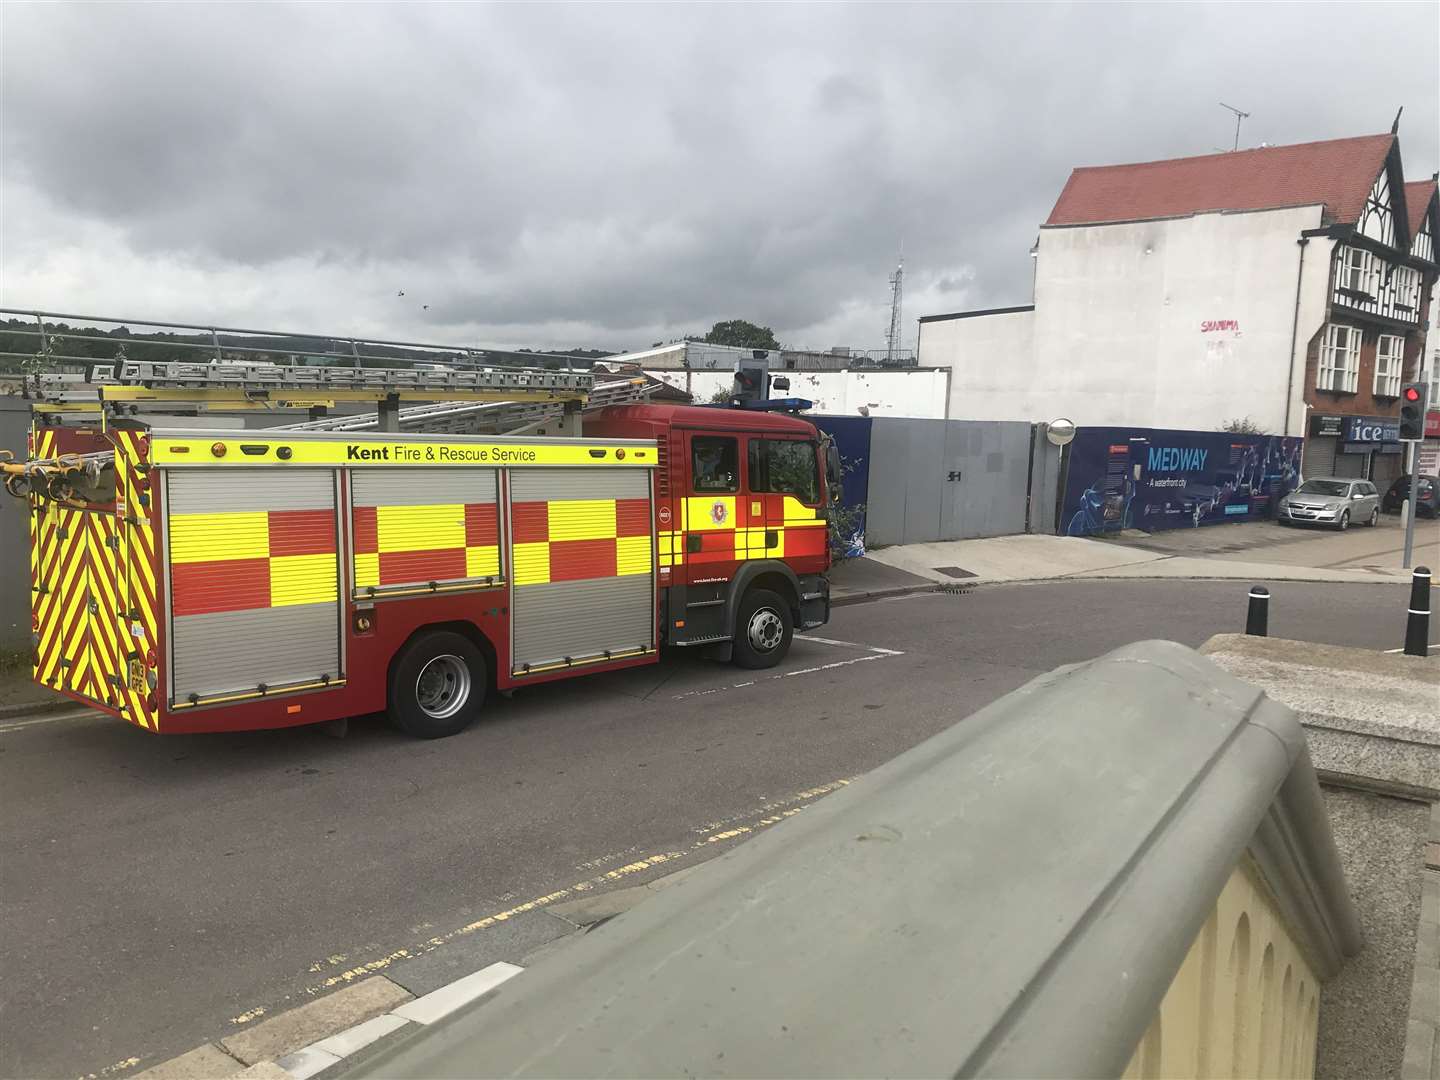 Police, fire and coastguard were called to the scene near Rochester Bridge last Wednesday